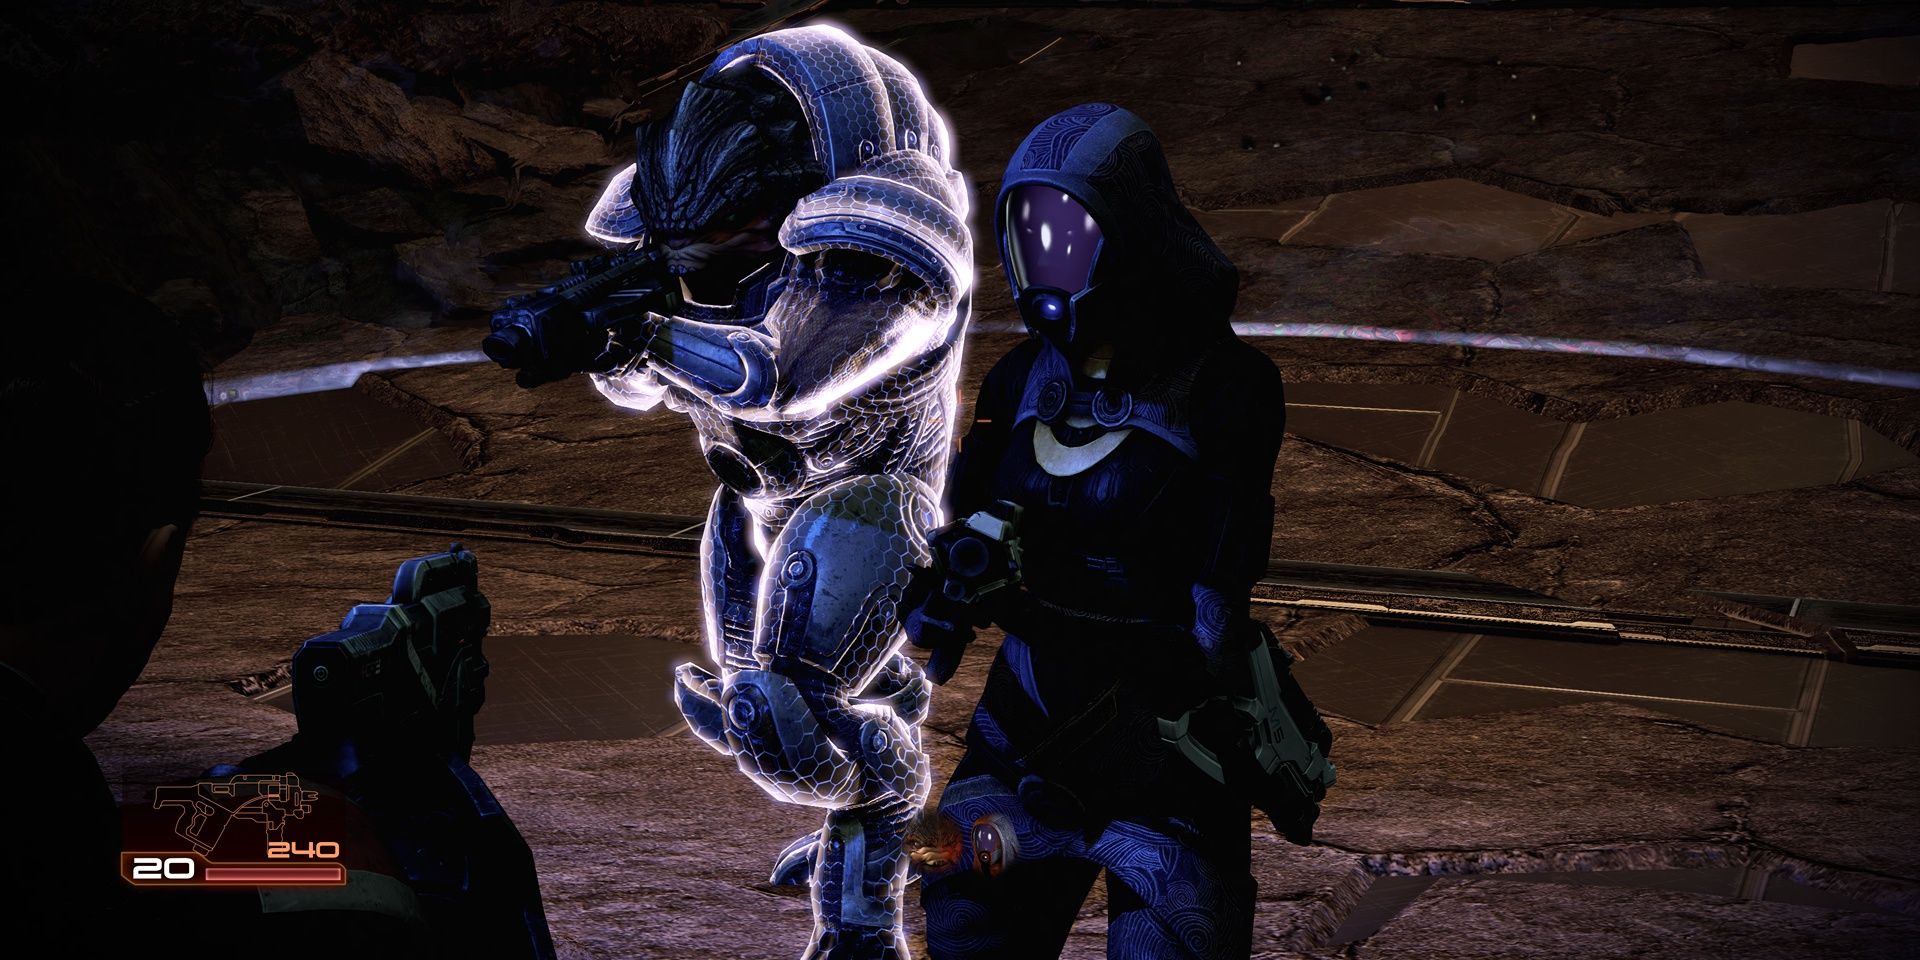 Mass Effect 2 Tali and Grunt Squad During The Suicide Mission